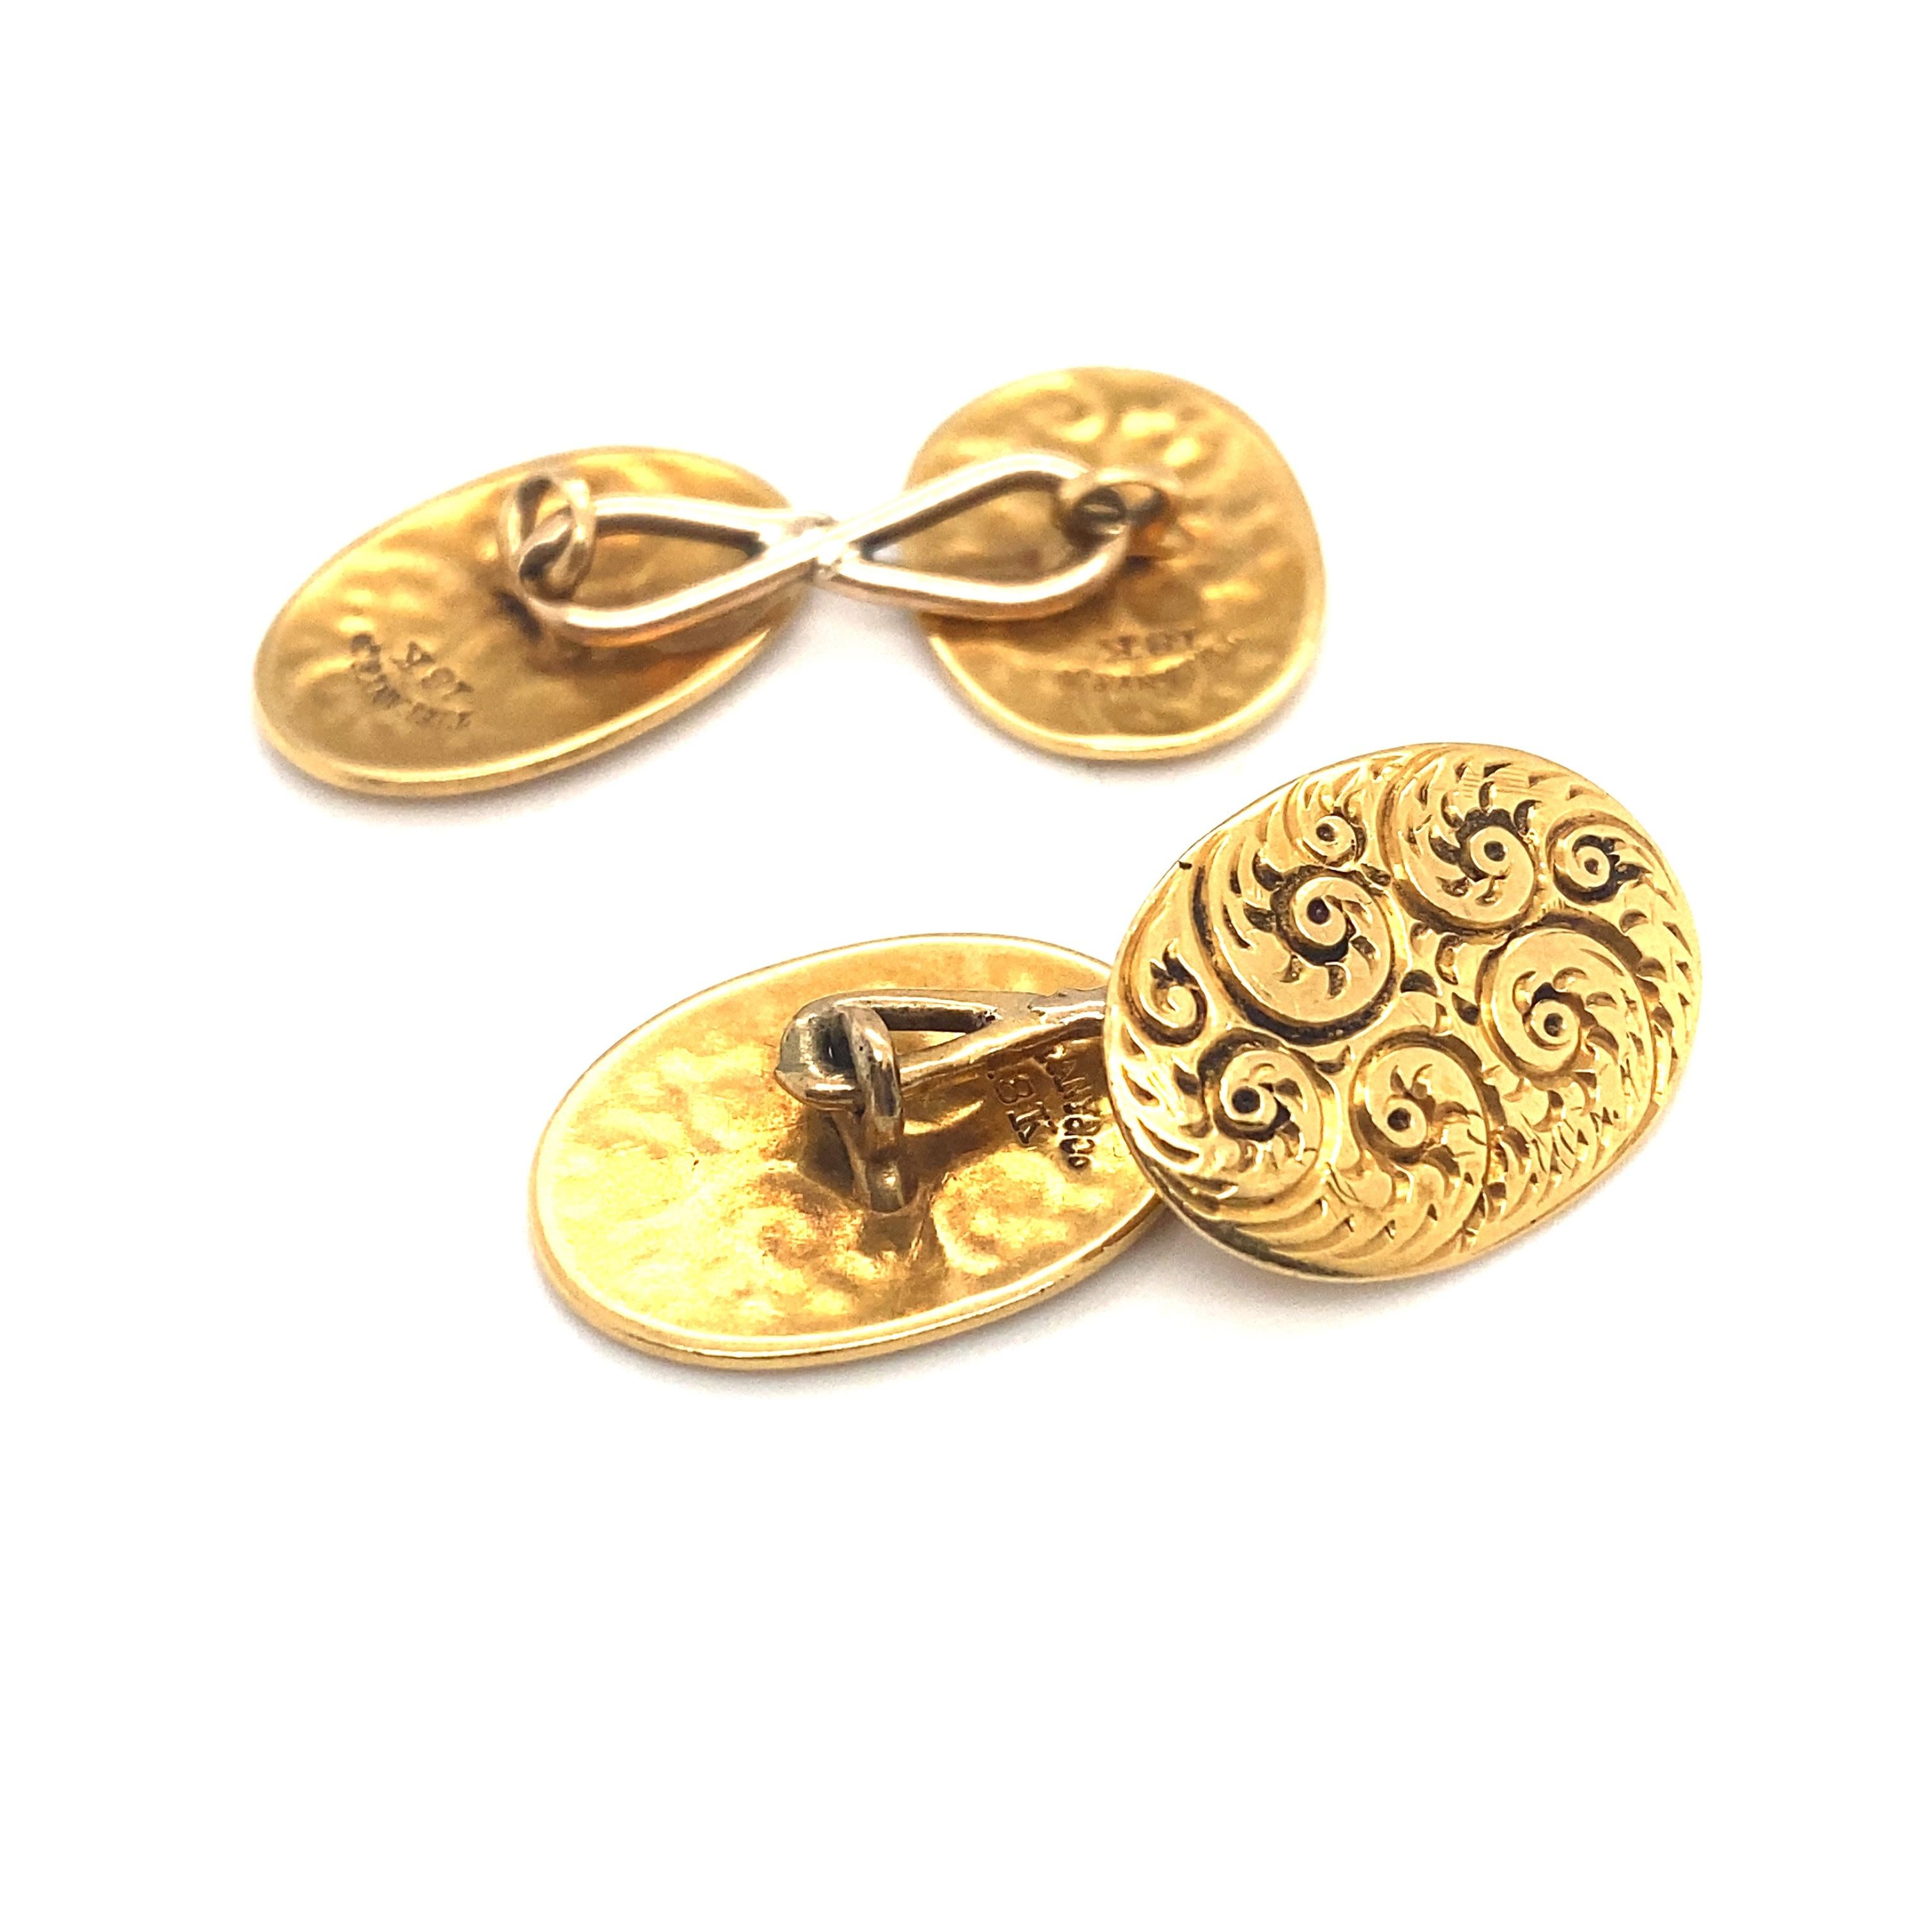 Circa 1890s Tiffany & Co. Etched Cufflinks in 18K Gold 2